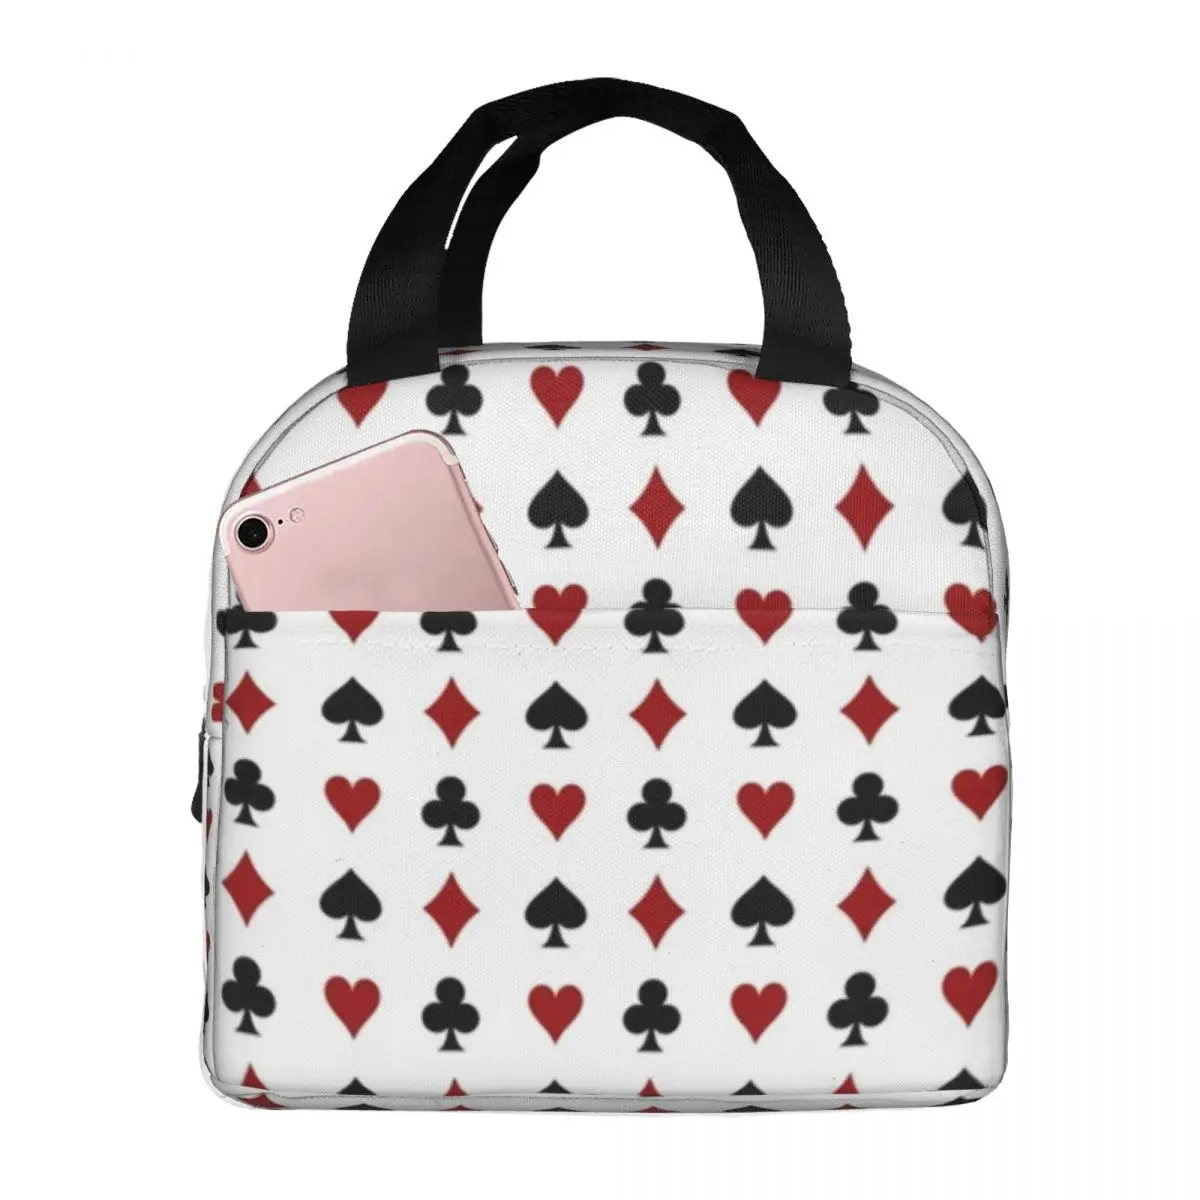 

Playing Poker Lunch Bag with Handle Hearts Diamonds Clubs Spades Card Suits Work Cooler Bag Carry Aluminum Fancy Thermal Bag